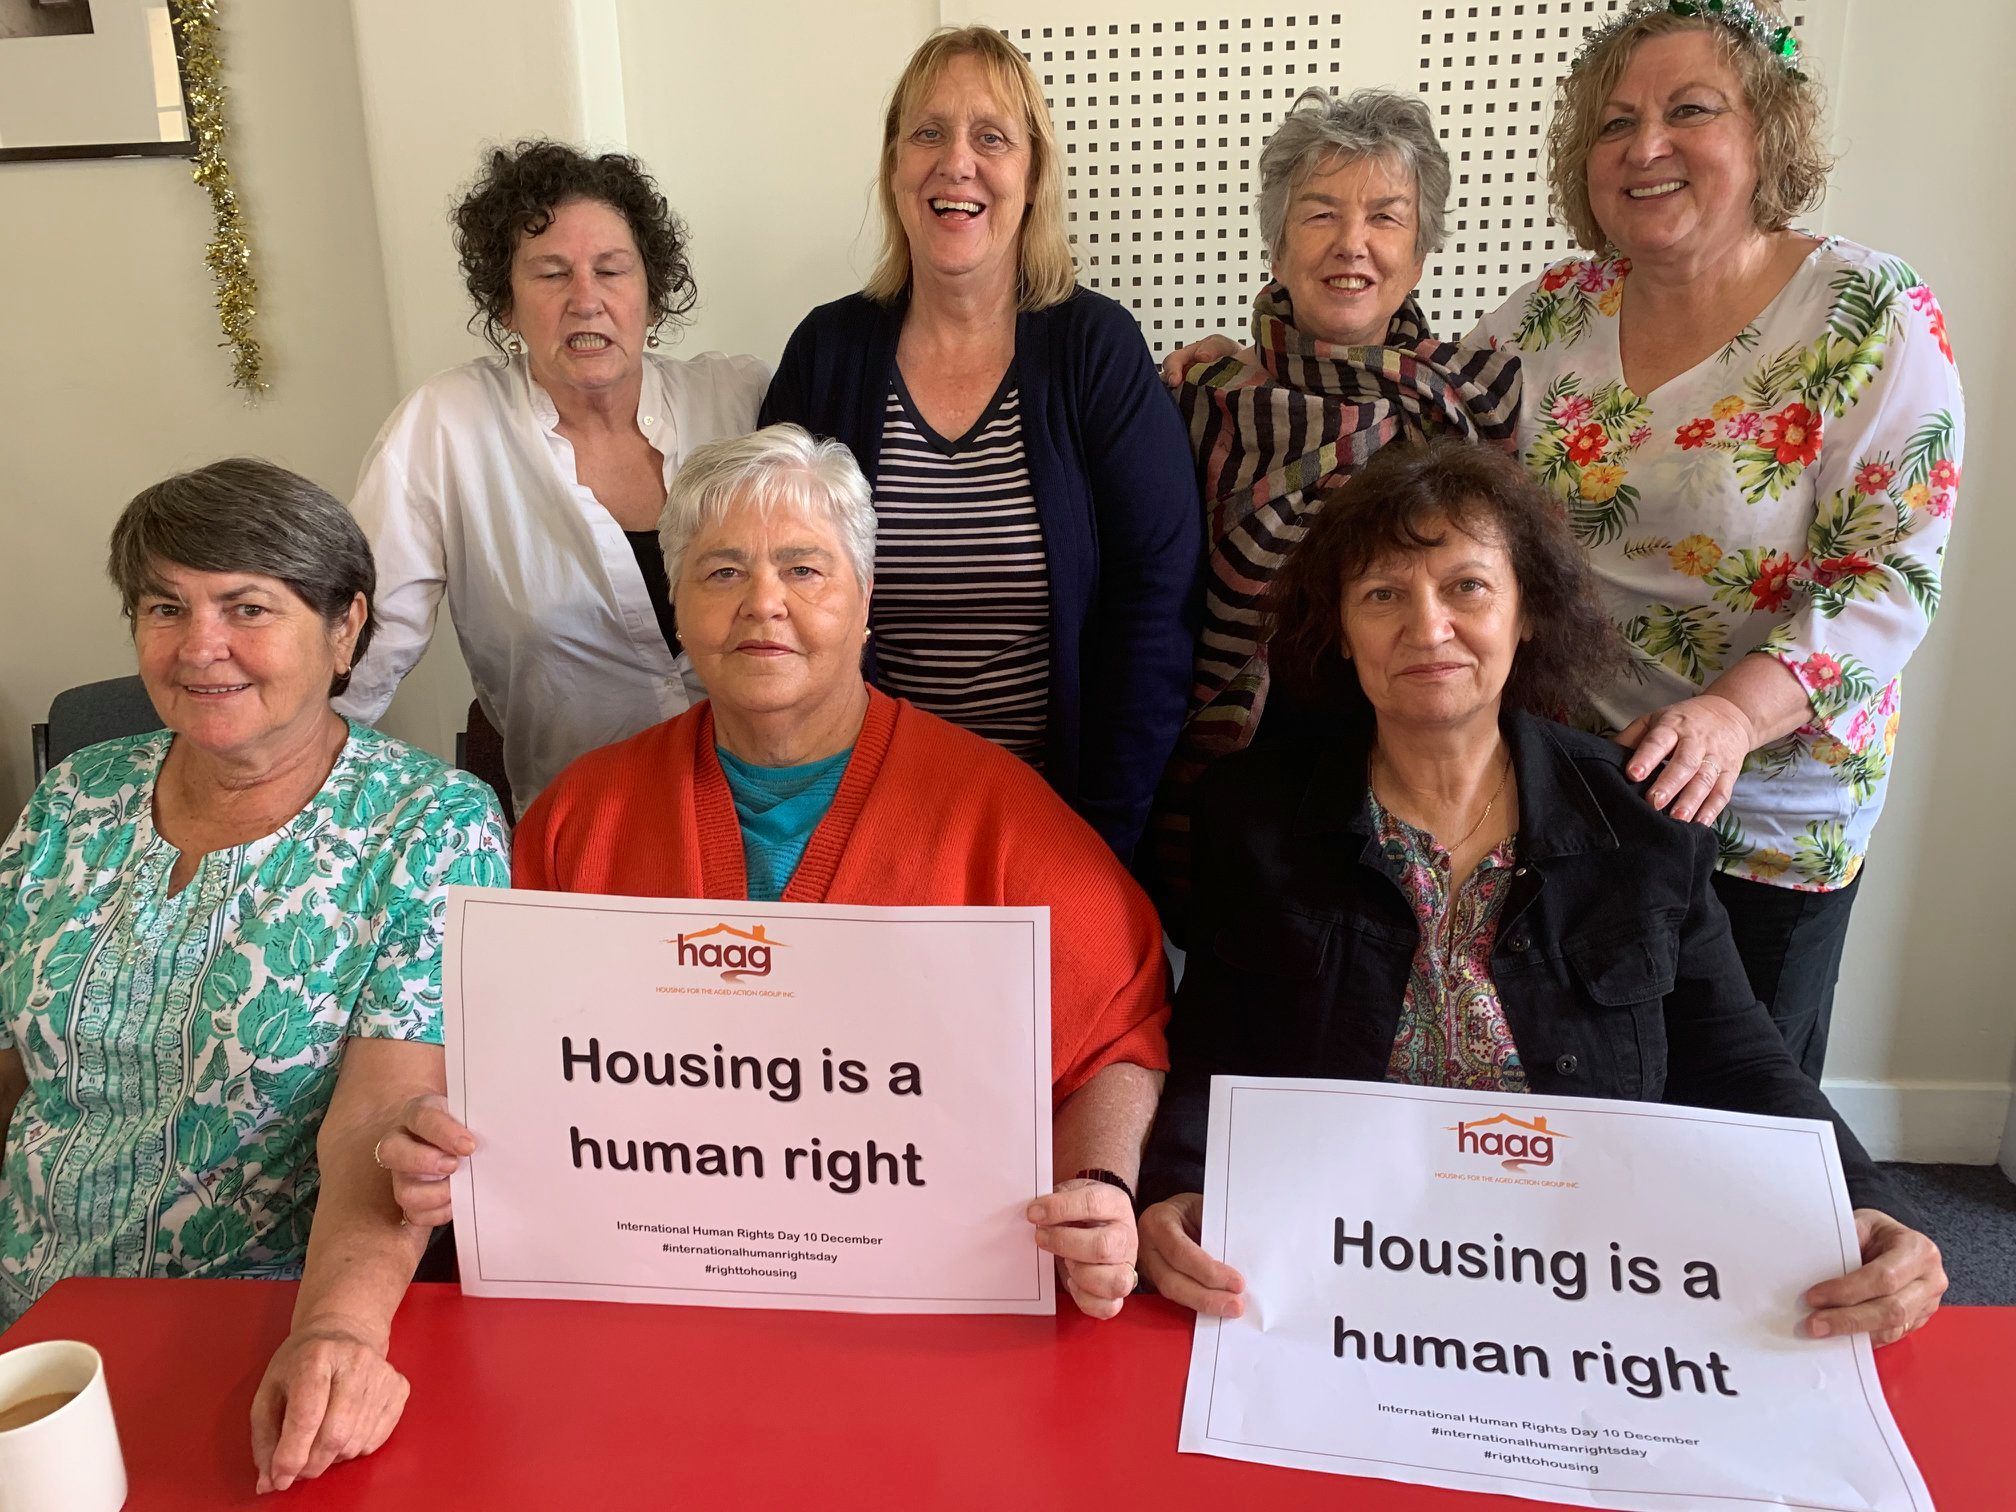 Poverty and Homelessness – The Reality For Too Many Older Women